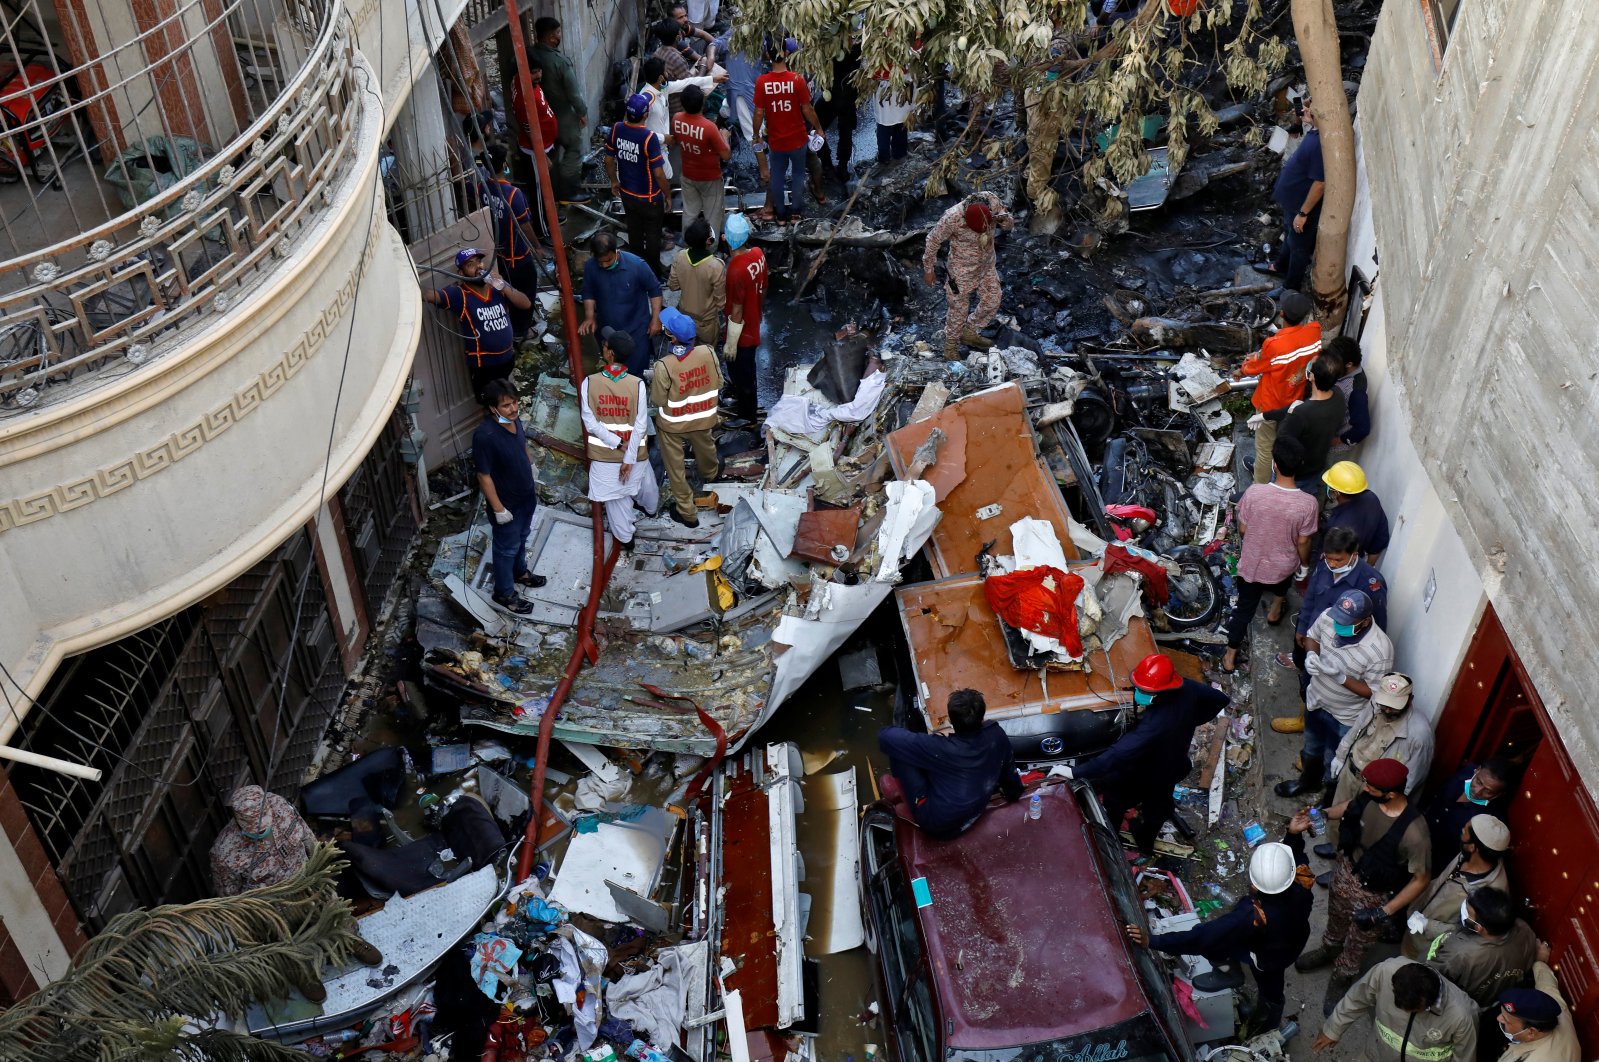 Rescue workers gather at the site of a passenger plane crash in a residential area near an airport in Karachi, Pakistan, May 22, 2020. (Reuters Photo)